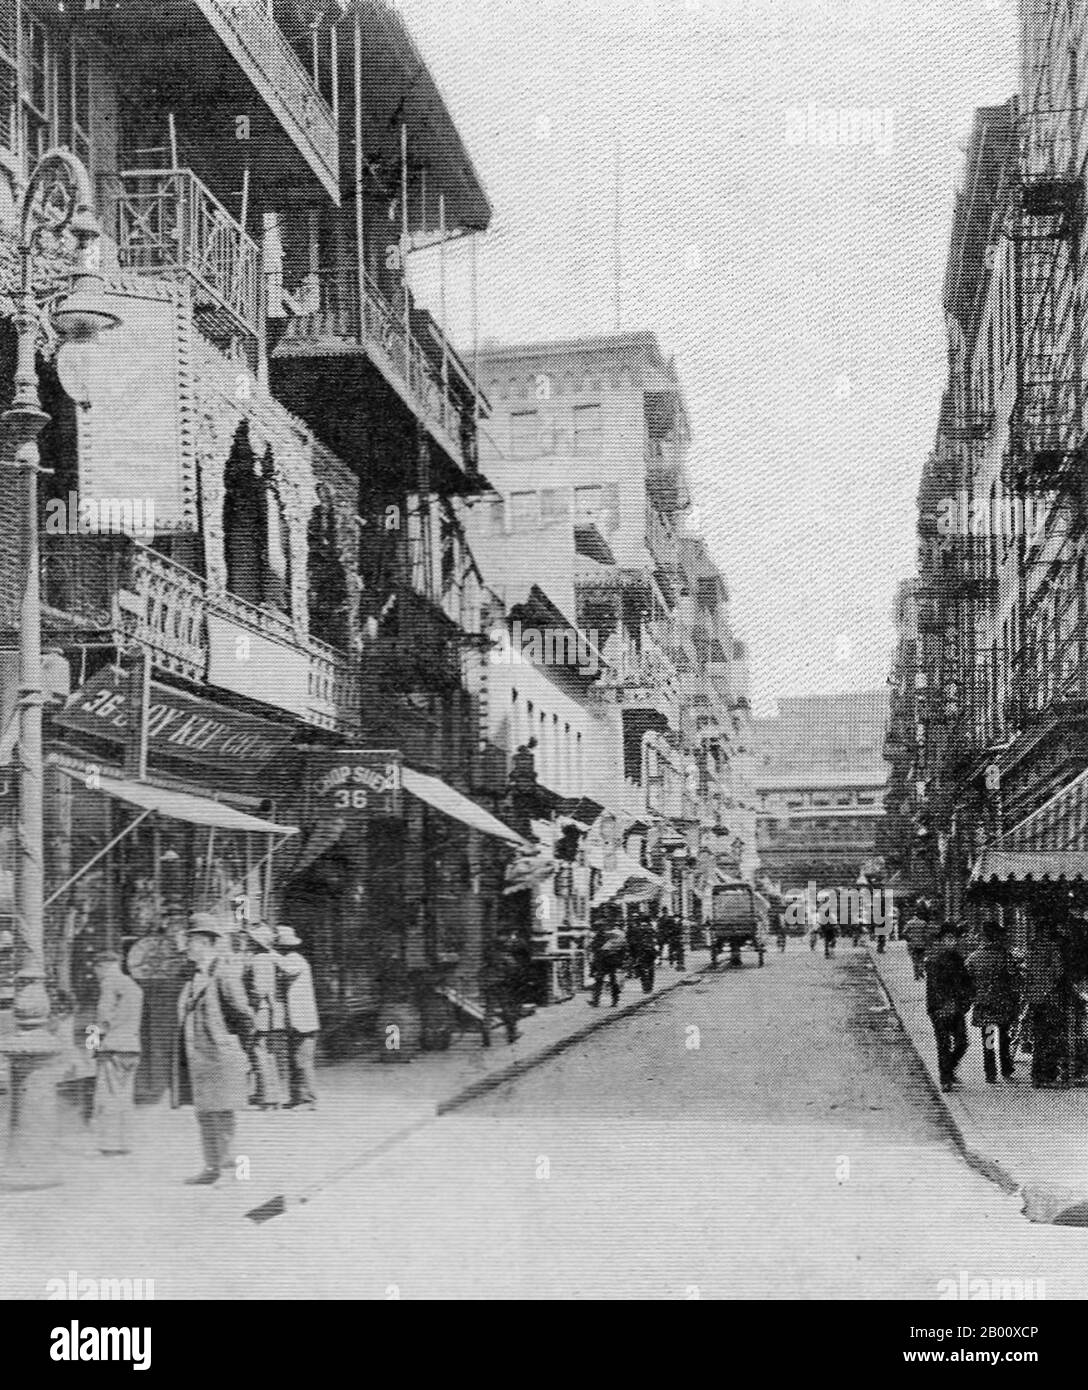 USA: Pell Street, New York Chinatown, c. 1900.  This early 20th century image depicts a placid scene on Pell Street. But not far from the Chop Suey restaurant at no. 36 stood no. 15, home base for the notorious Hip Sing Tong, one of the ruthless Chinese-American criminal associations that fought for control of Chinatown and the booming opium trade in the neighborhood’s early days. Hip Sing and similar tongs formed in New York, San Francisco, and other major cities to protect Chinese immigrants from the racism and exploitation they encountered upon arriving in the U.S. in the late 1800s. Stock Photo